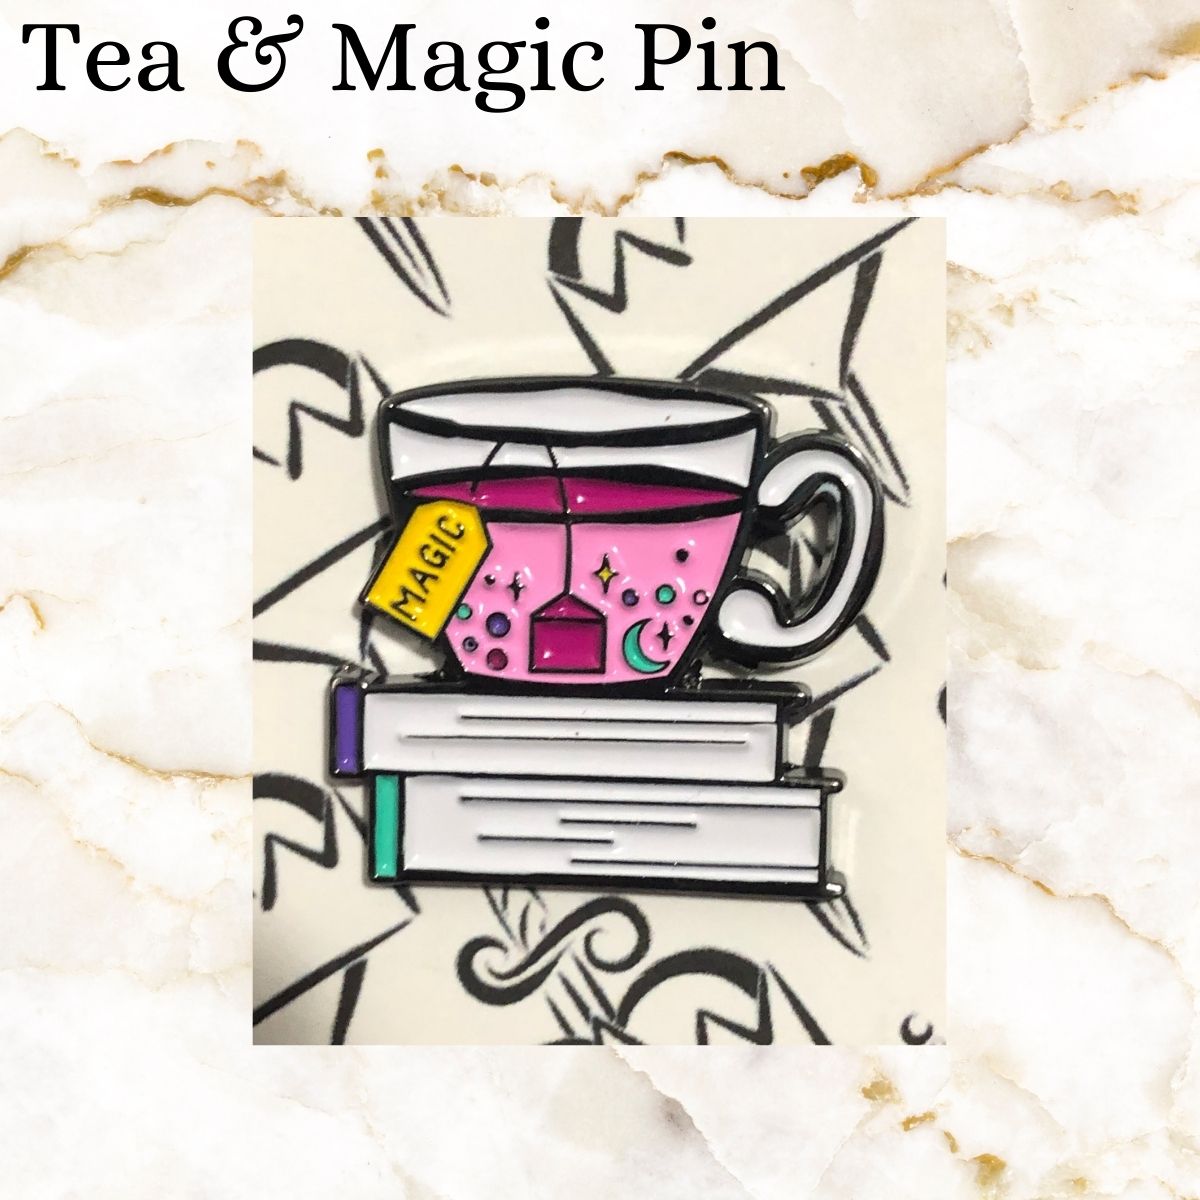 Book pin - of two books with a cup of pink tea and tea bag saying magic on it